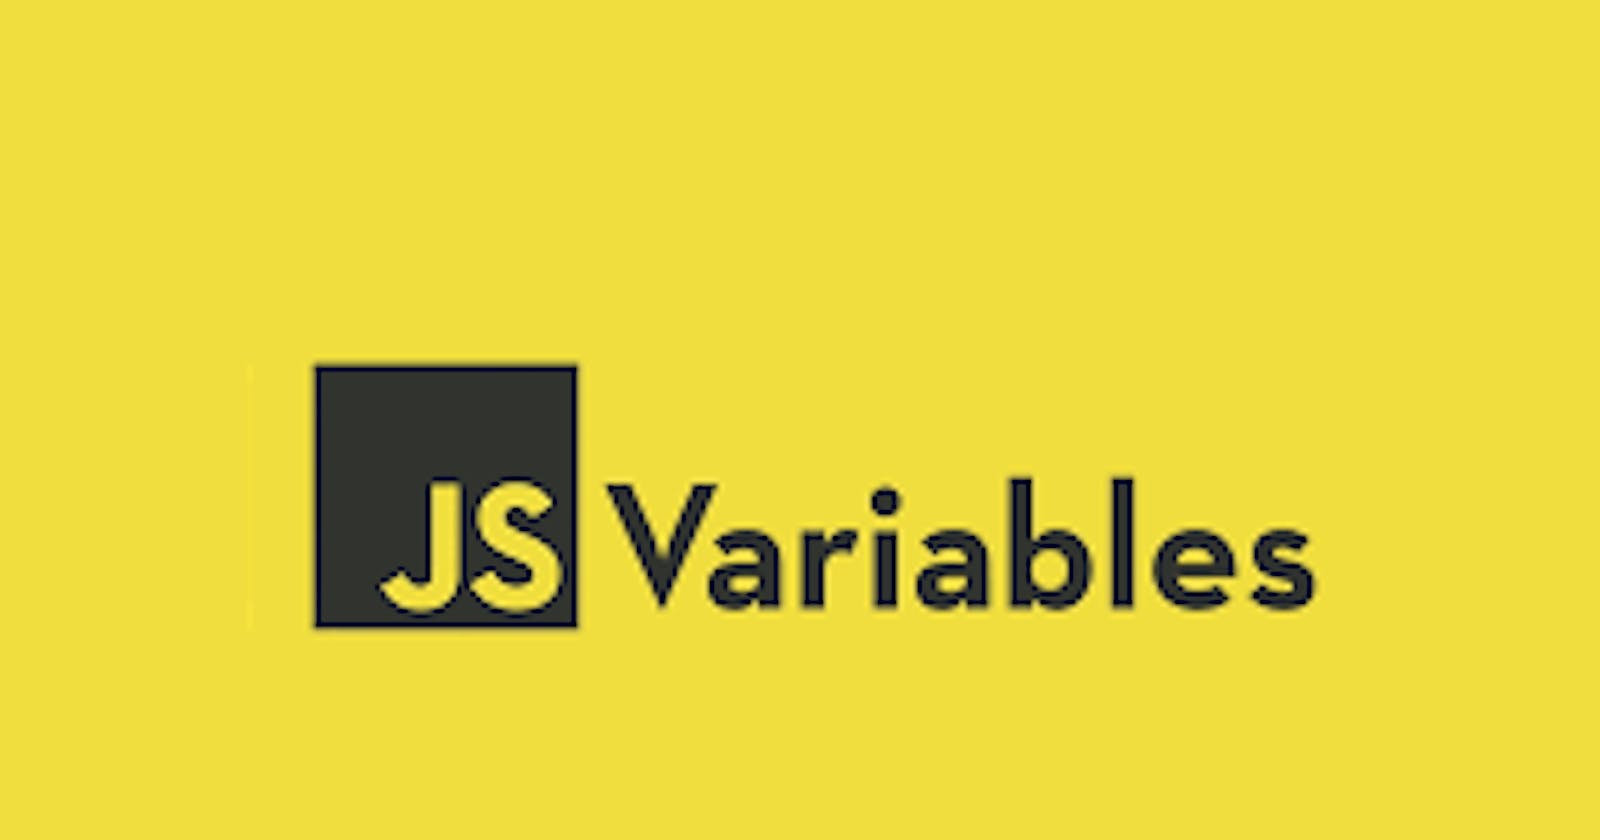 Variables & Data types in JavaScript